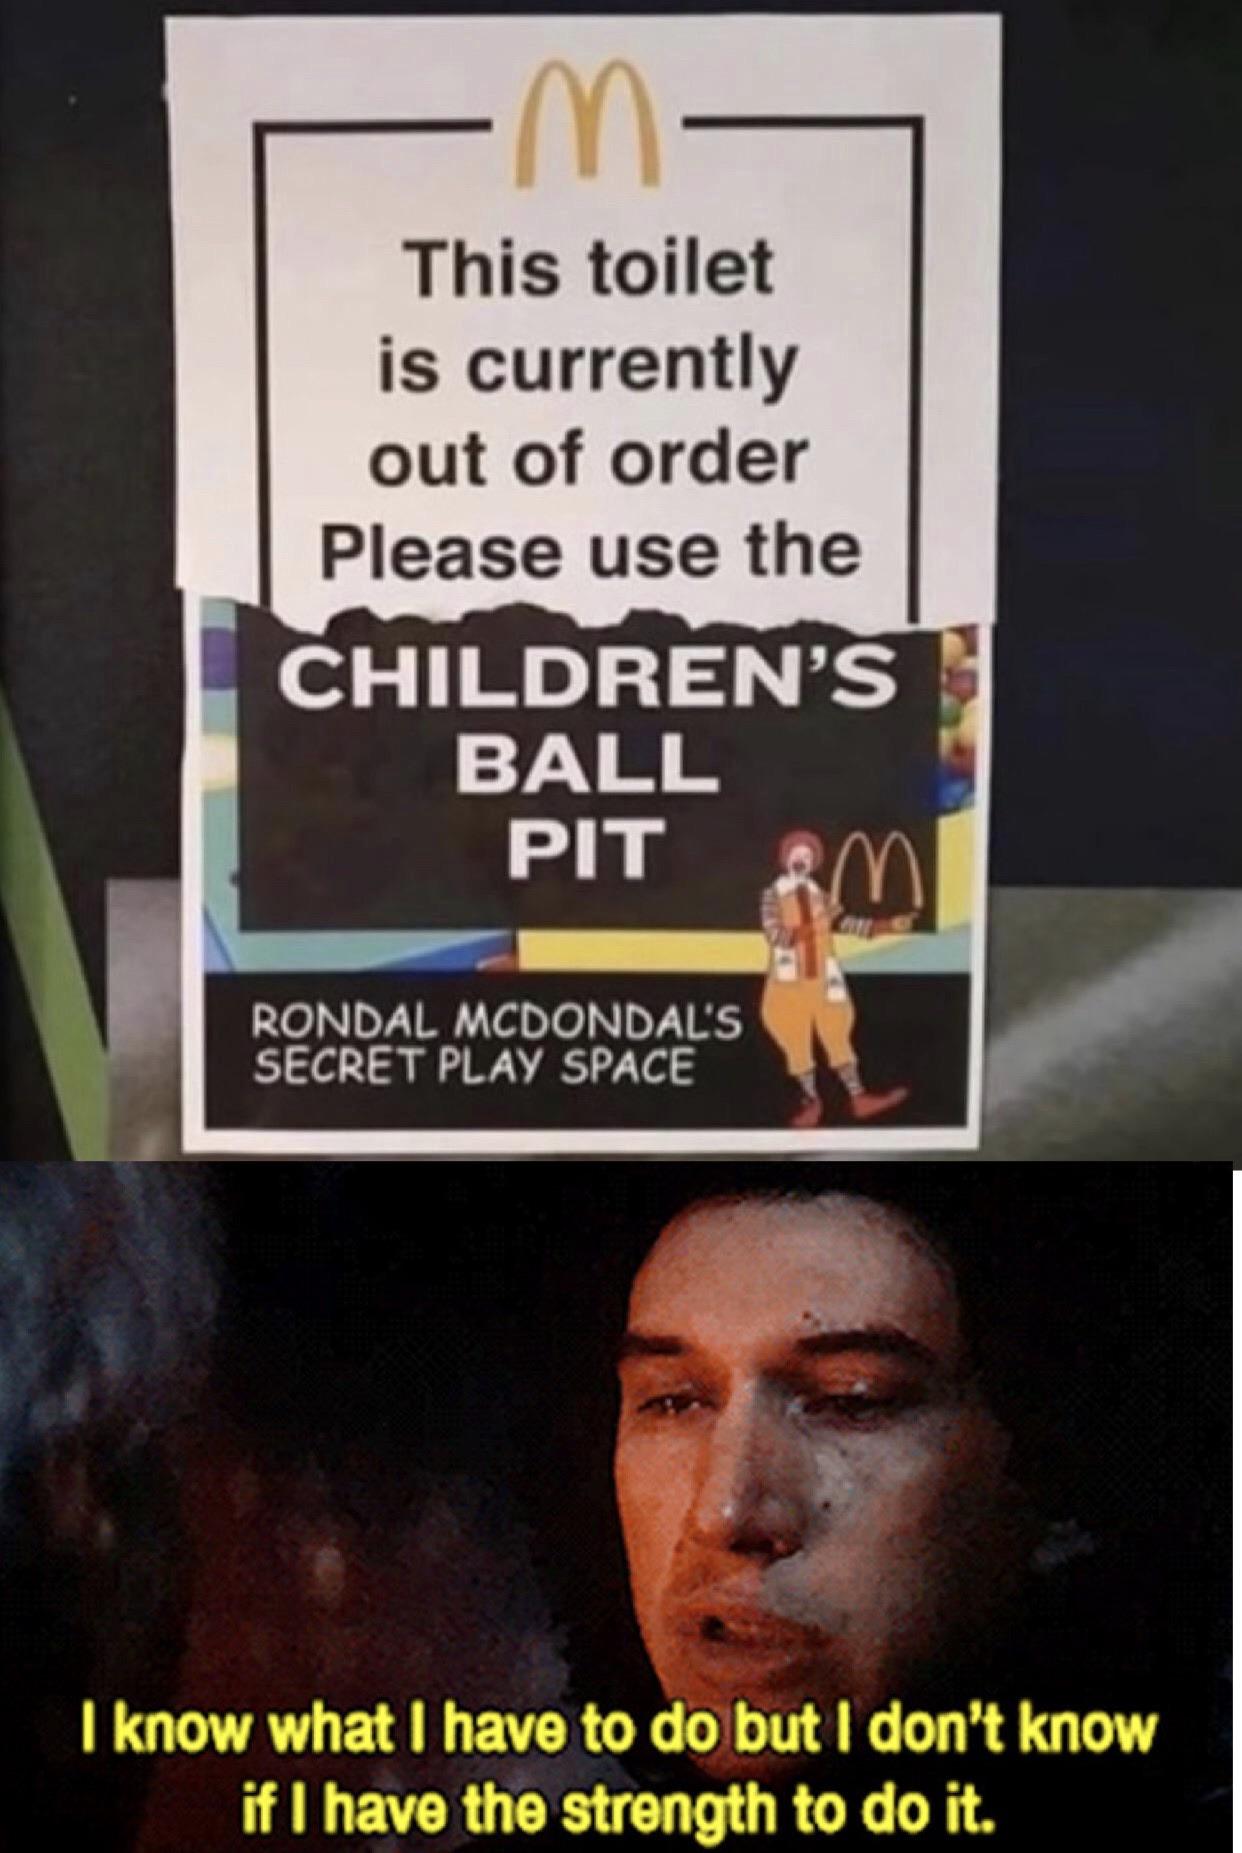 Sequel-memes,  Star Wars Memes Sequel-memes,  text: This toilet is currently out of order Please use the CHILDREN'S BALL PIT RONDAL MCDONDACS SECRET PLAY SPACE I know what I have to do but I don't know if I have the strength to do it. 